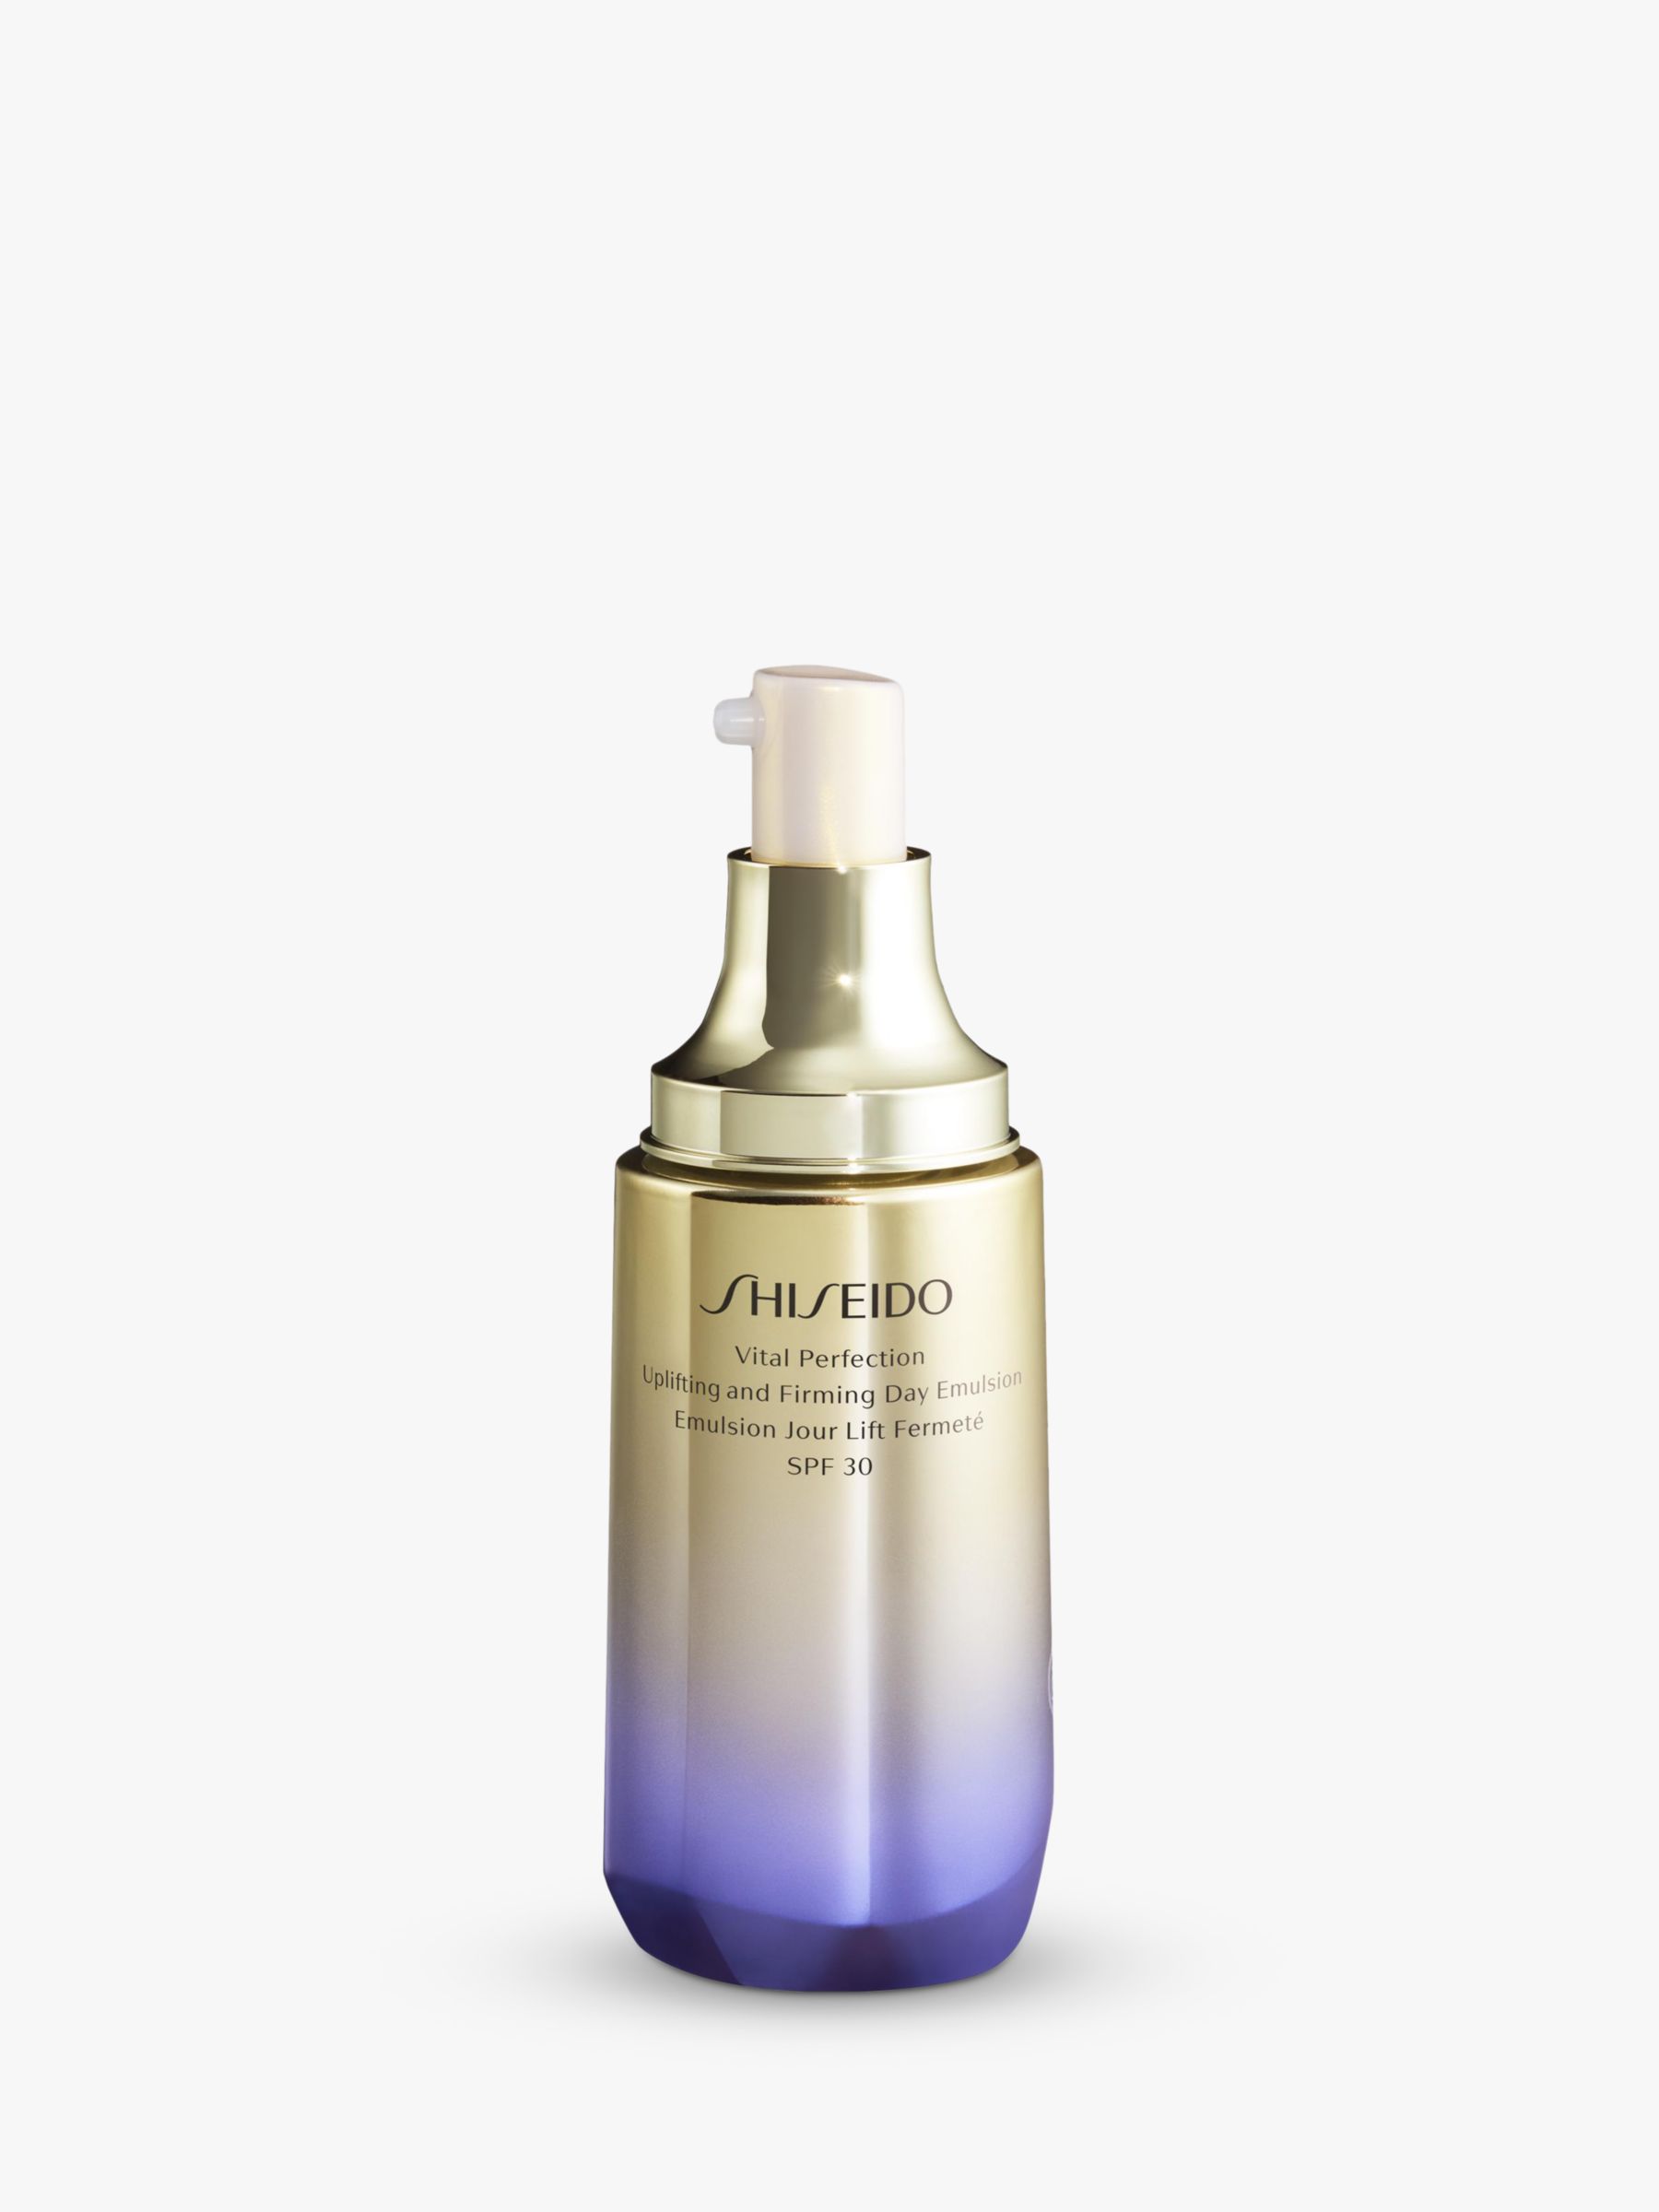 Shiseido Vital Perfection Uplifting and Firming Day Emulsion SPF 30, 75ml 2